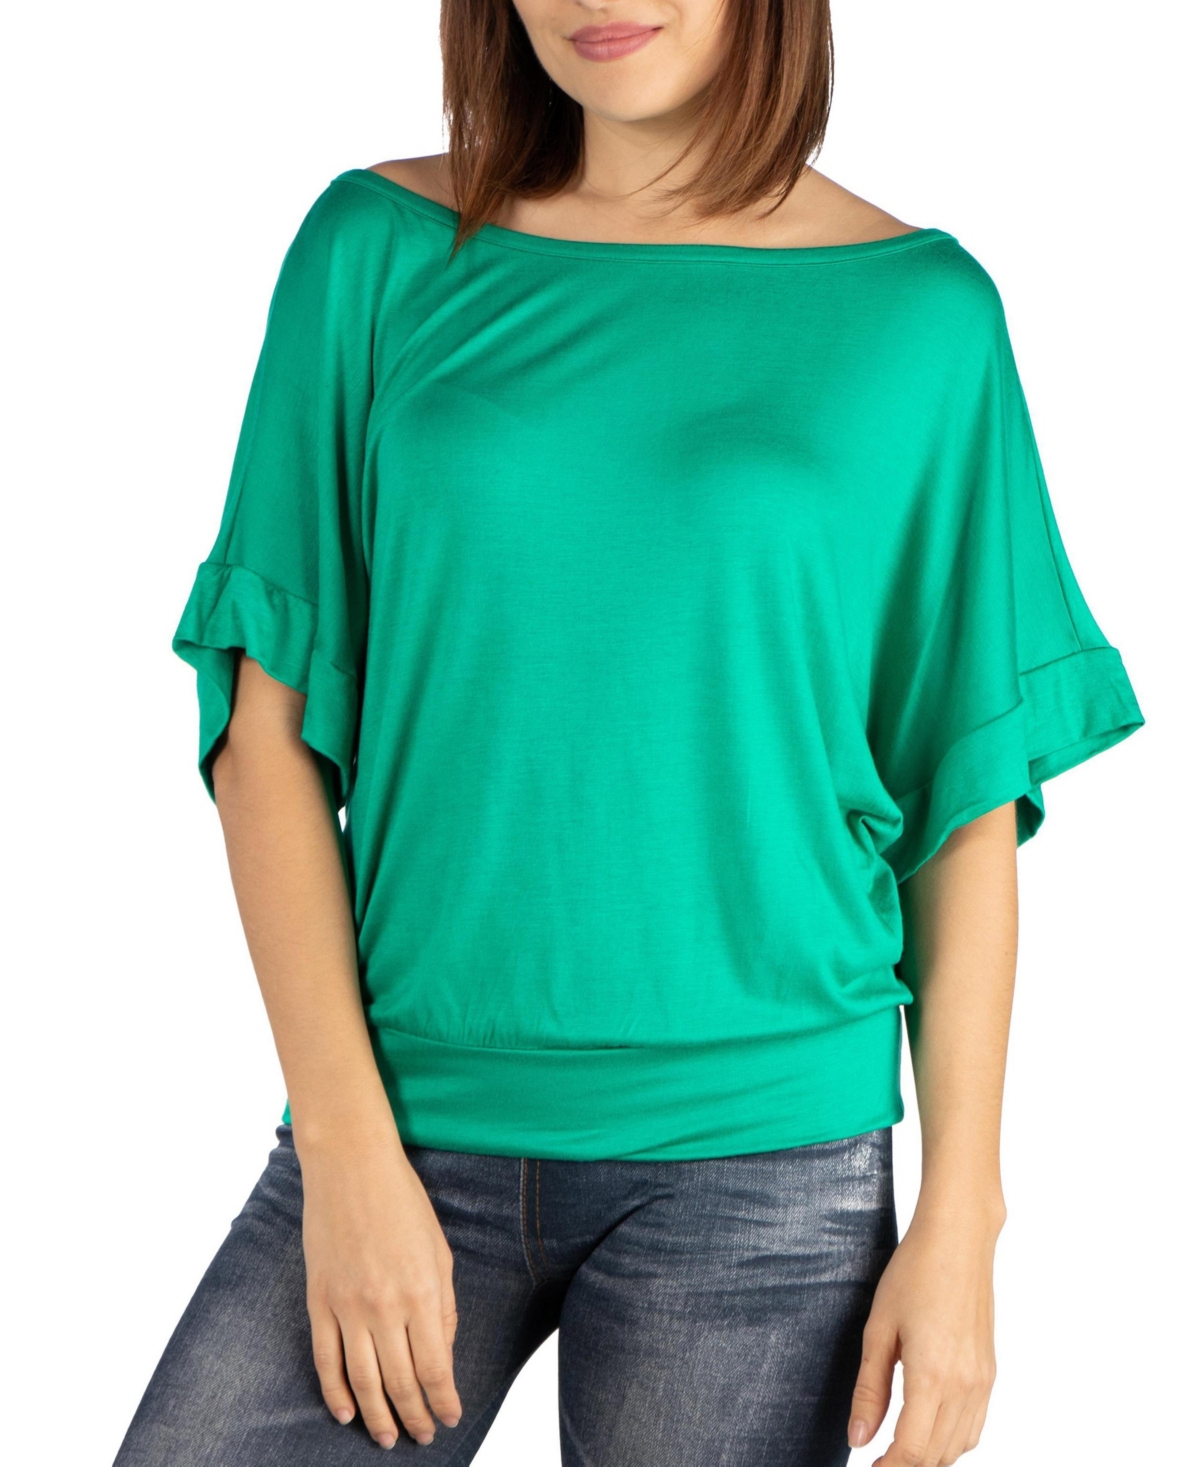 Women's Loose Fit Dolman Top With Wide Sleeves - Green